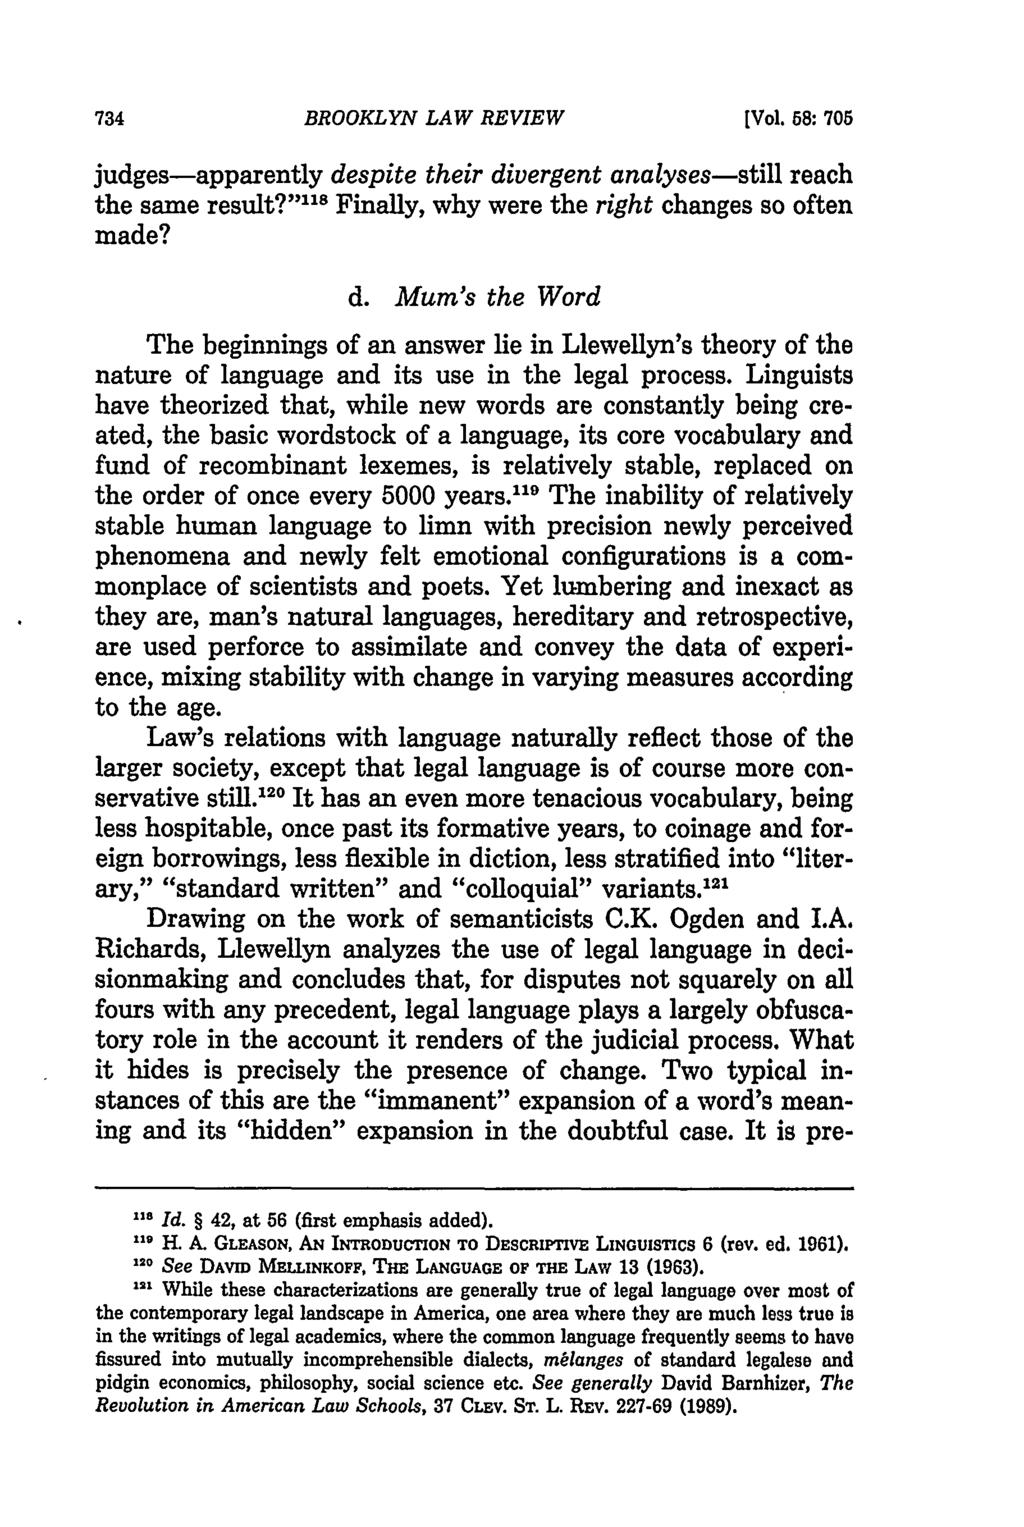 BROOKLYN LAW REVIEW [Vol. 58: 705 judges-apparently despite their divergent analyses-still reach the same result?" 118 Finally, why were the right changes so often made? d. Mum's the Word The beginnings of an answer lie in Llewellyn's theory of the nature of language and its use in the legal process.